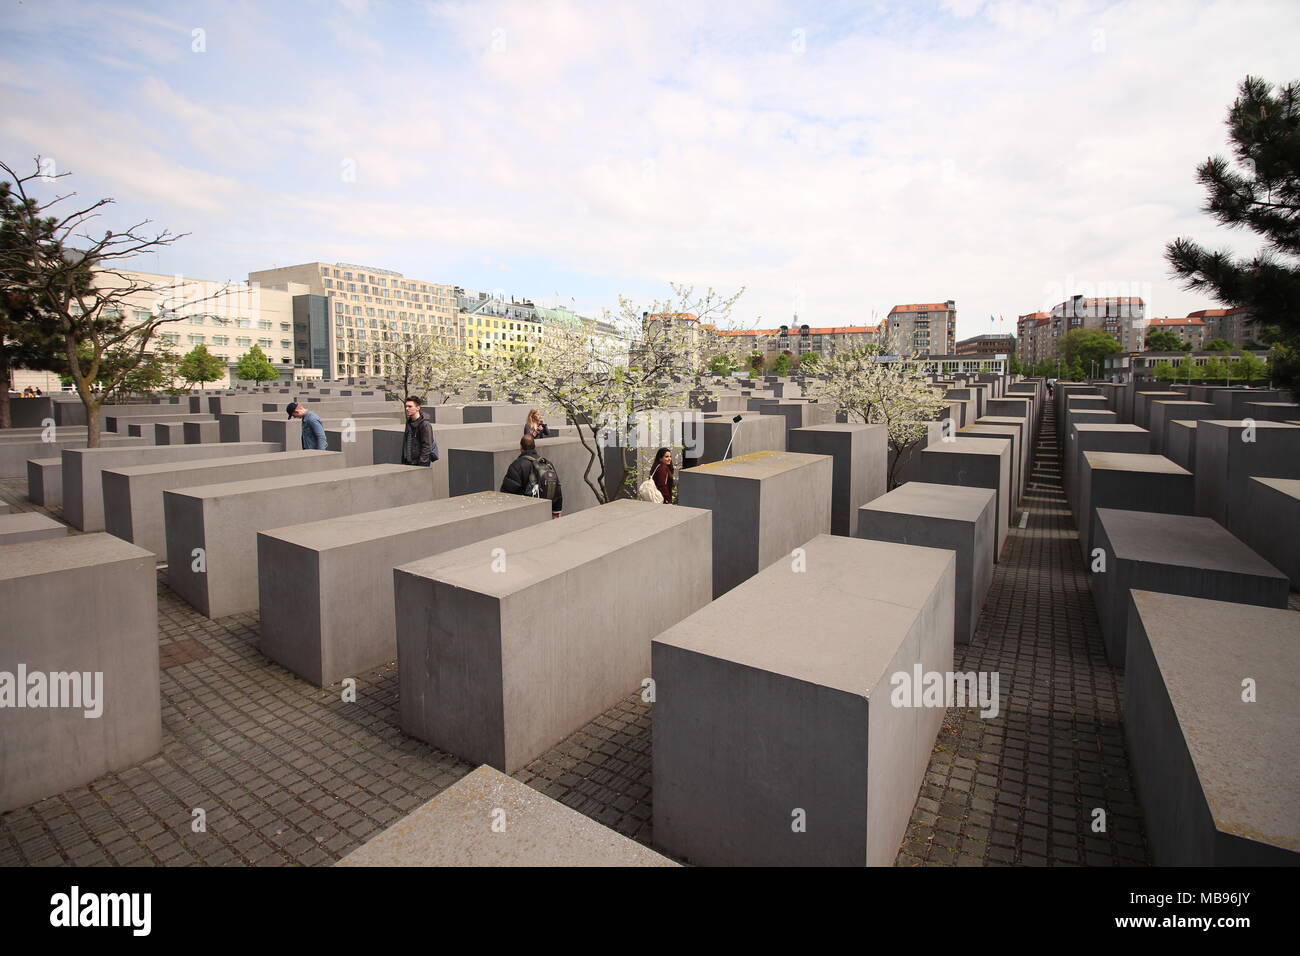 Memorial to the murdered Jews of Europe, Berlin, Germany Stock Photo